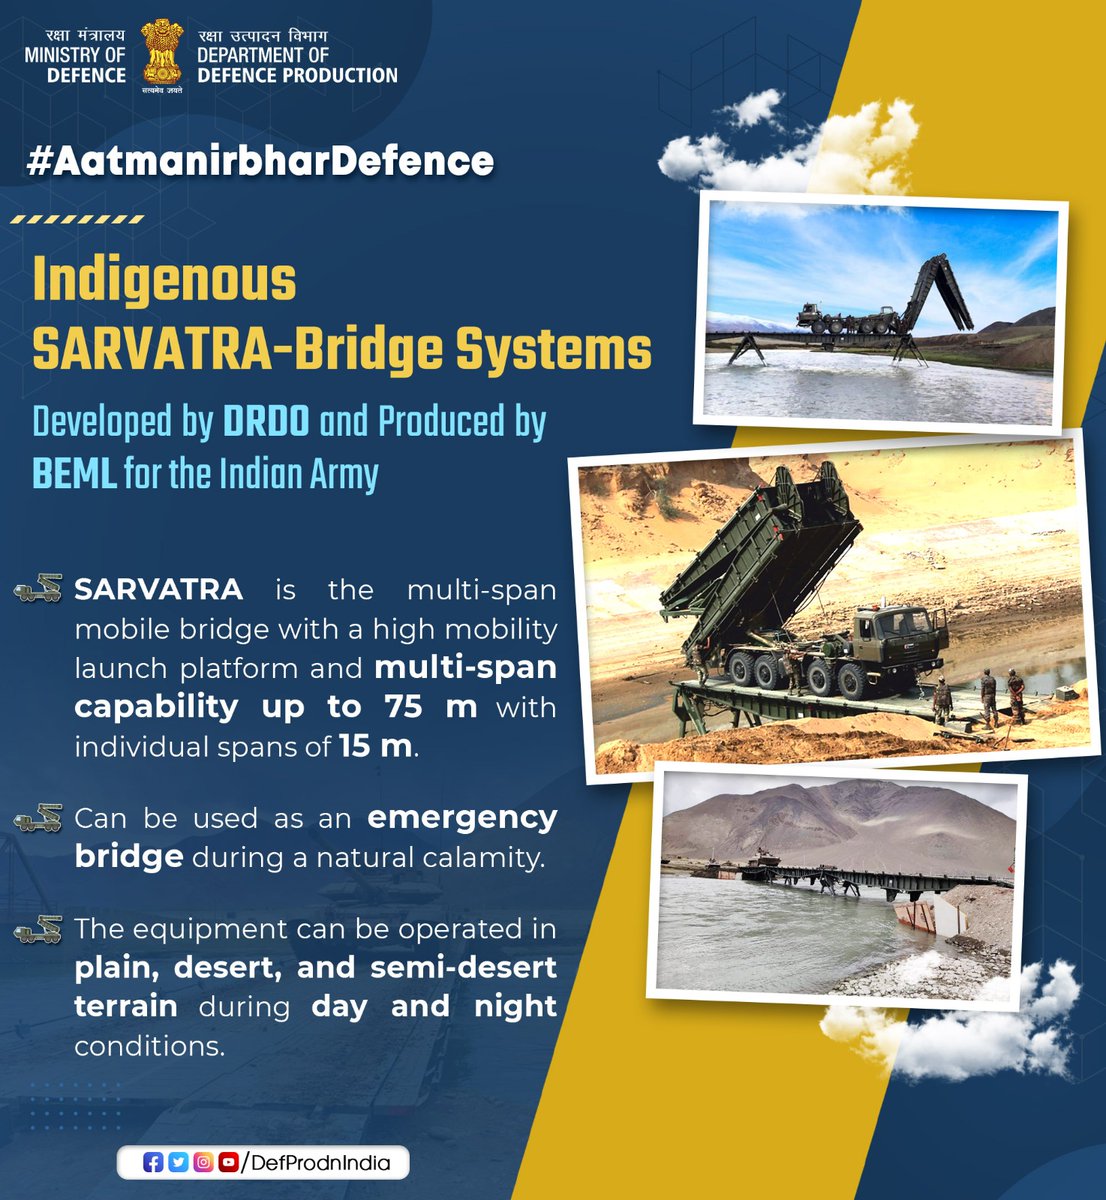 #AatmanirbharDefence 🔹Indigenous #SARVATRA Bridge Systems Developed by #DRDO and Produced by #BEML for the #IndianArmy 🔹 Sarvatra is the multi-span mobile bridge with a high mobility launch platform & multi-span capability up to 75 m with individual spans of 15 m.